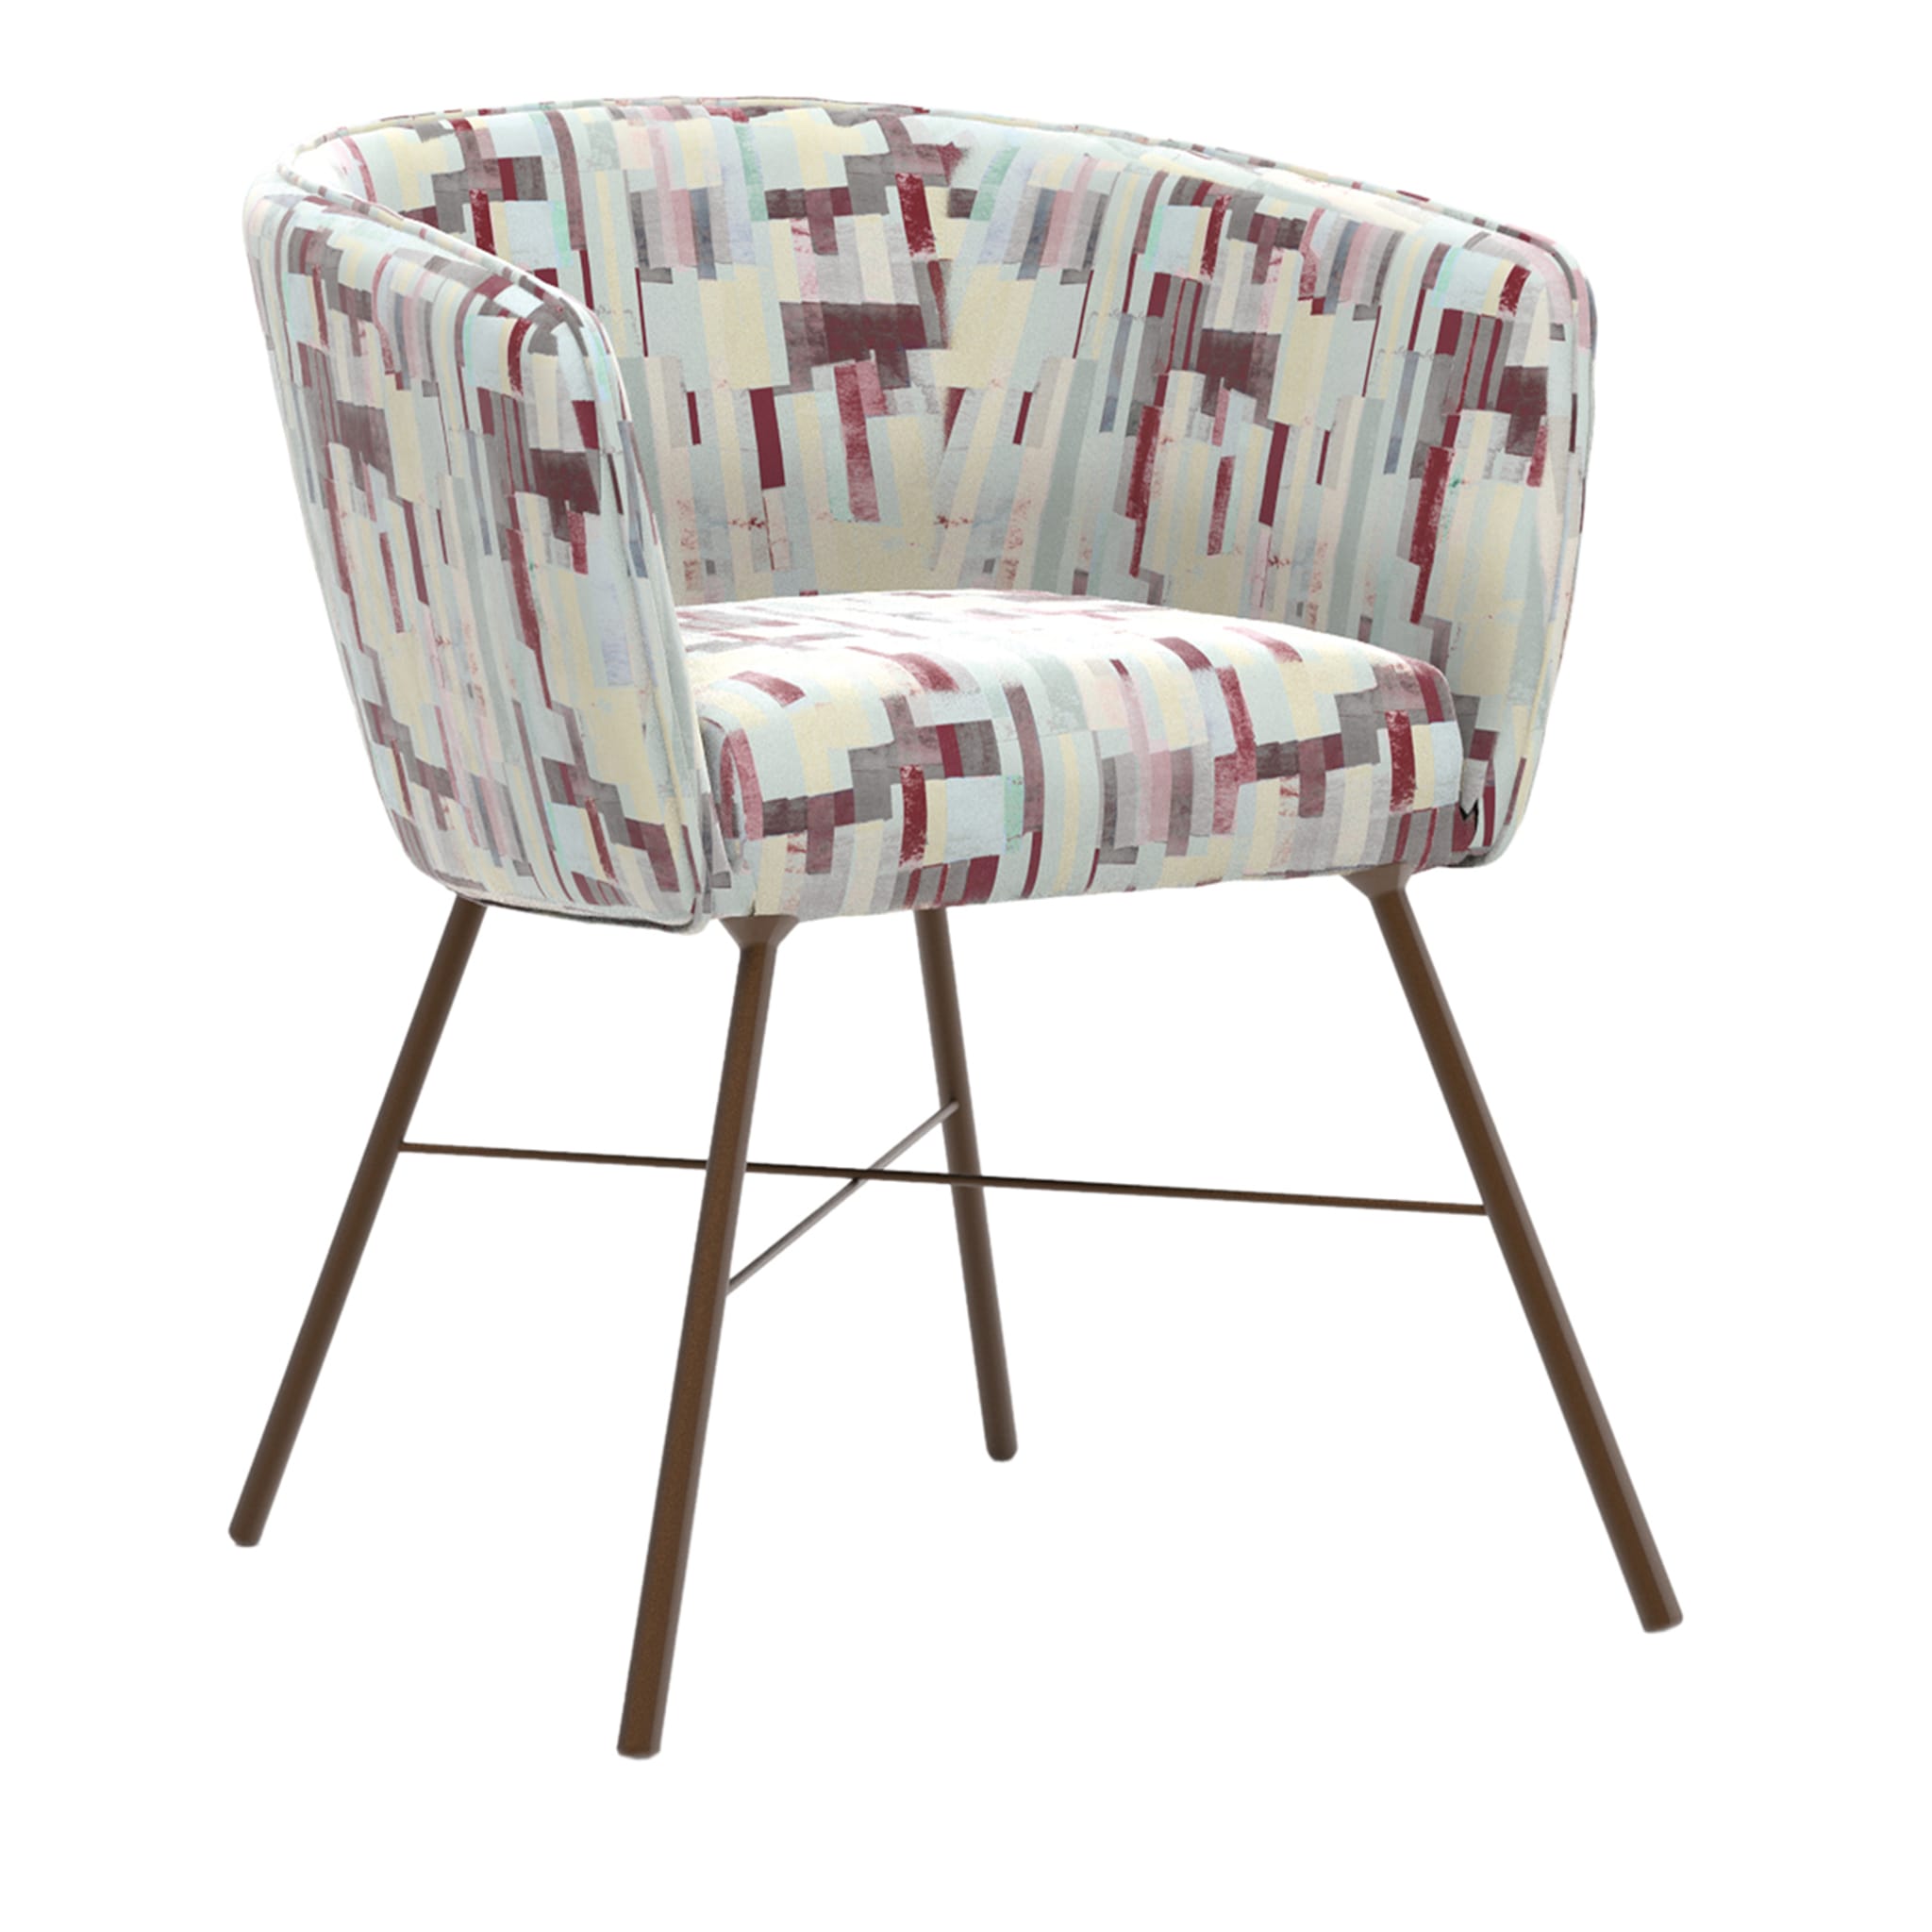 Linton Multicolored Chair - Main view